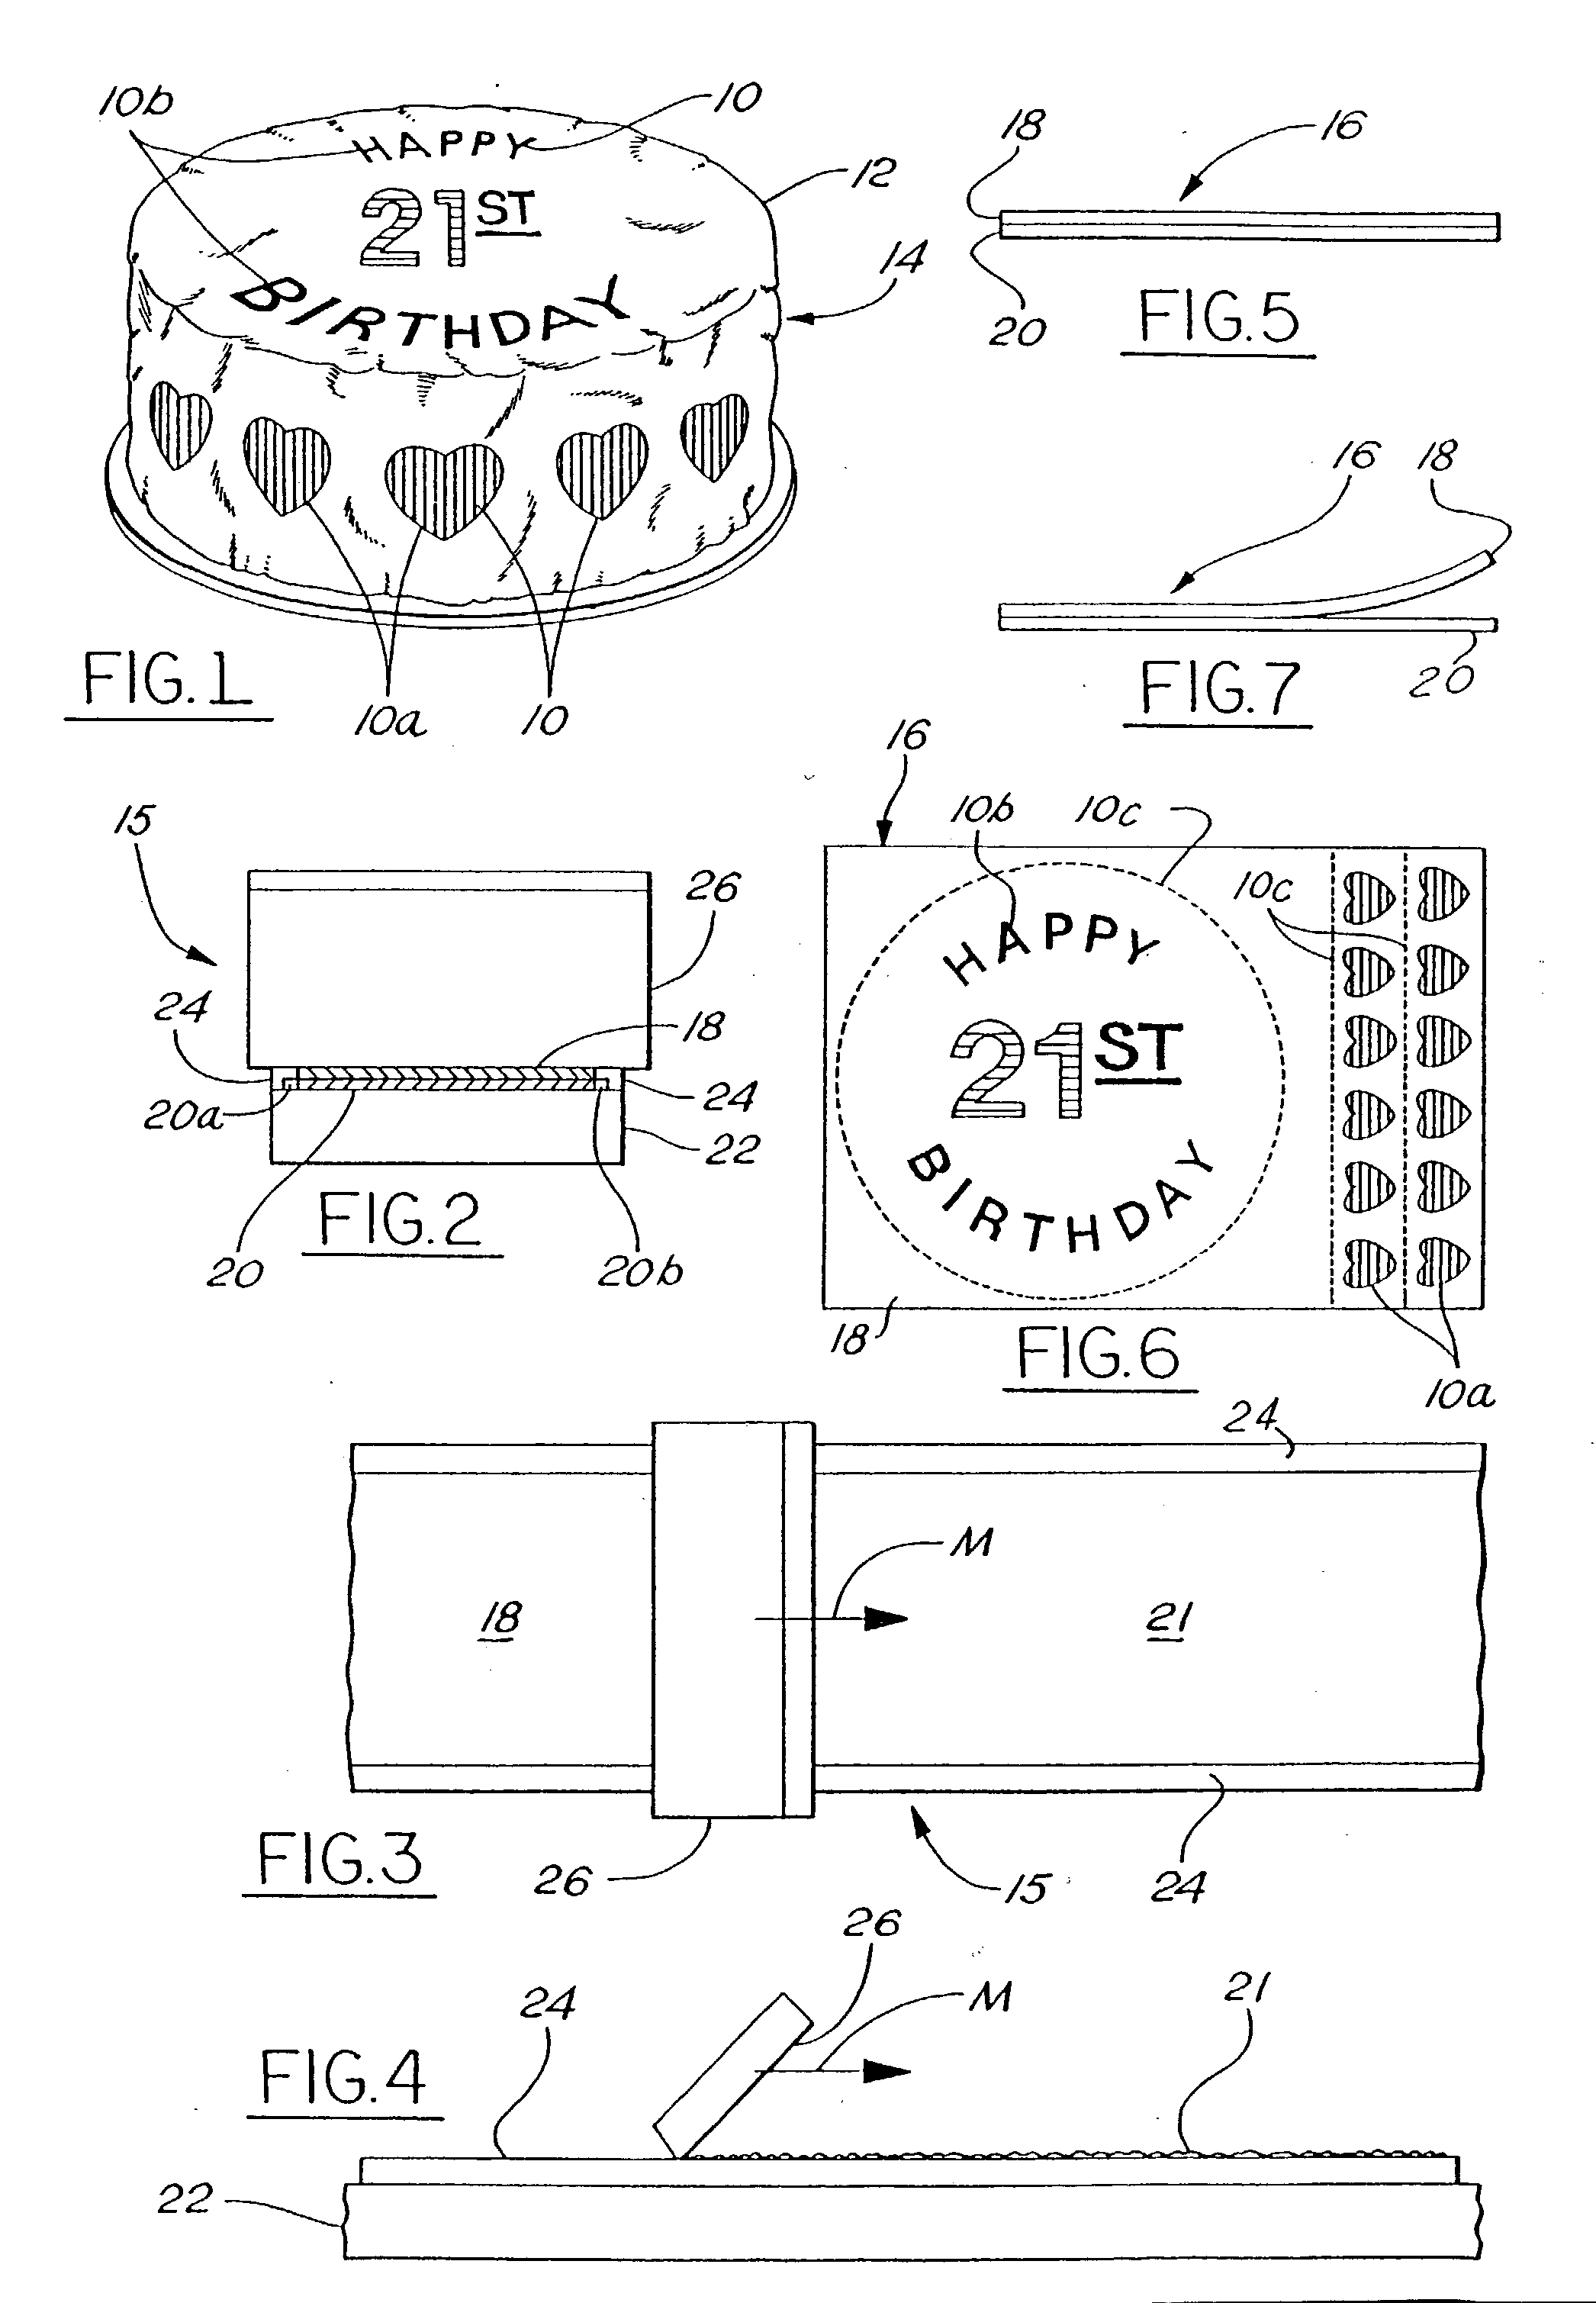 Edible film and method of using same for decorating foodstuffs